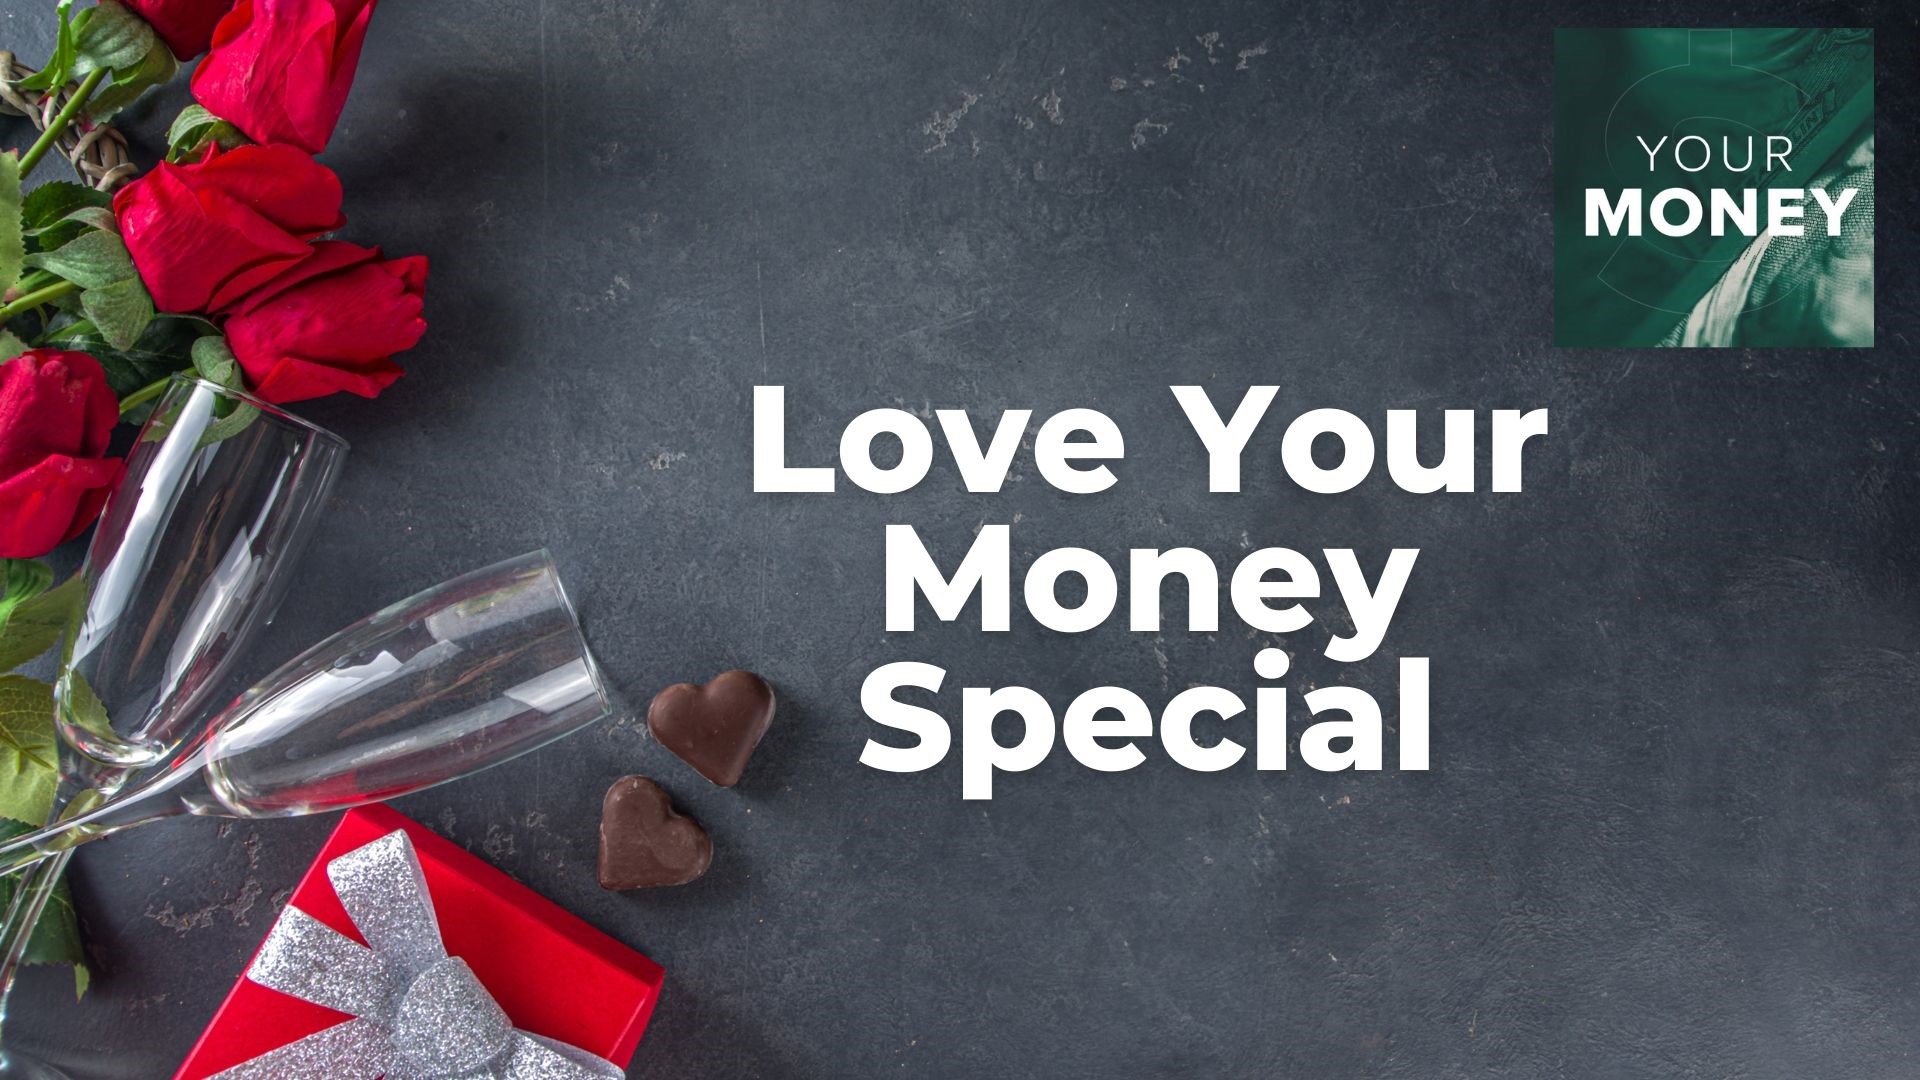 Love is in the air for Valentine's Day and Gordon Severson has tips to save money. From advice for couples to romance scams, here are ways to protect your money.